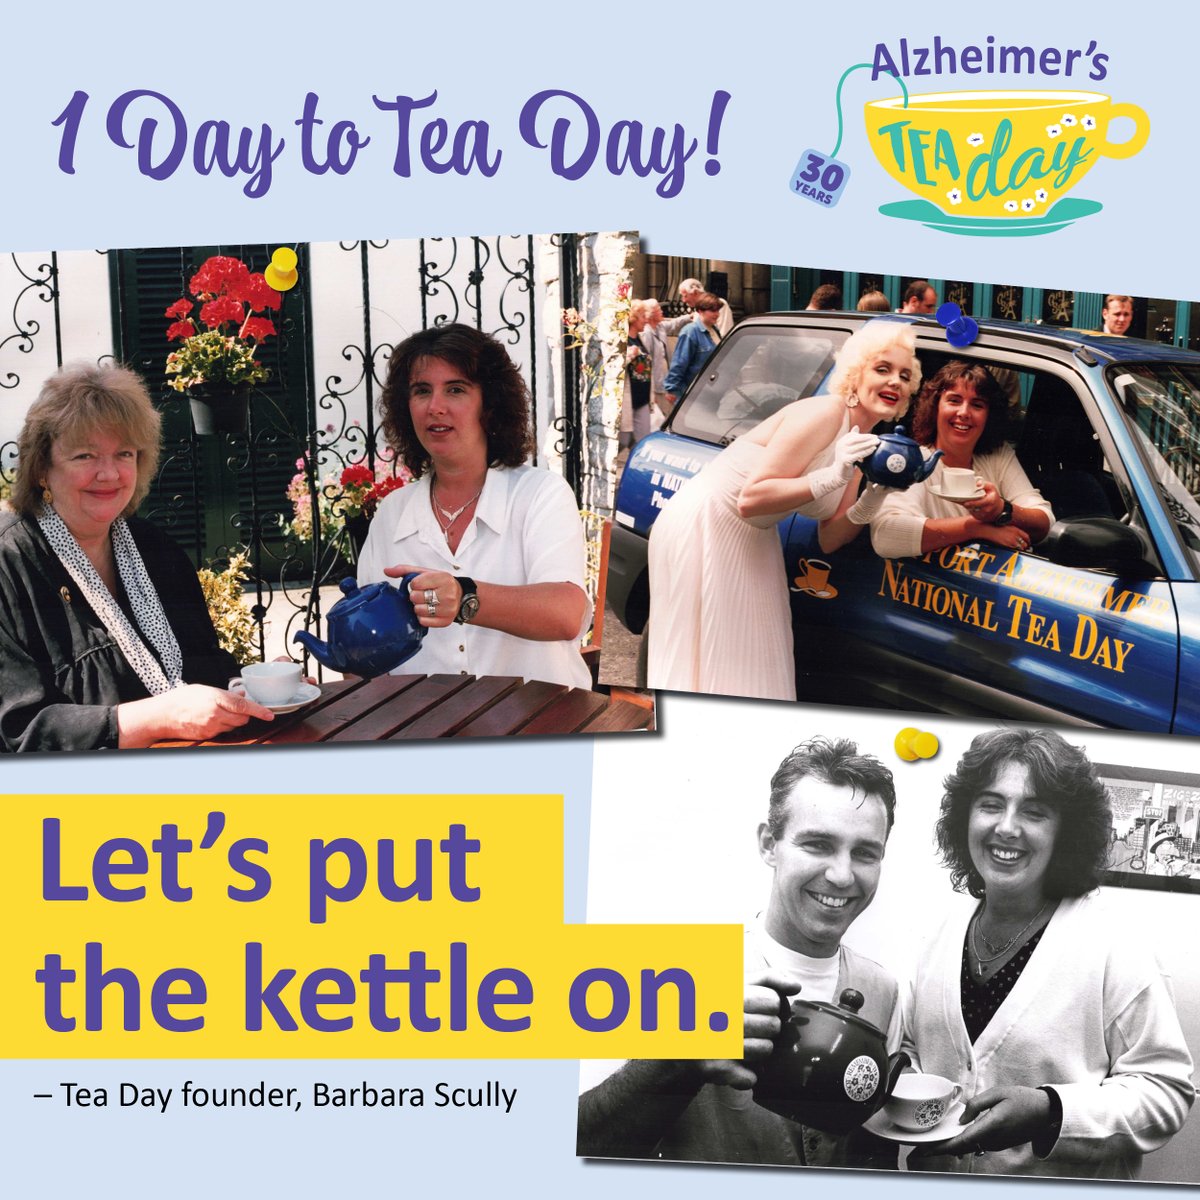 The first ever Tea Day took place 30 years ago in 1994, when one amazing woman, Barbara Scully, had a big idea… and put the kettle on. Please join @barbarascully tomorrow to help us make this year’s Tea Day the best and biggest one ever. #TeaDay2024 #TeaDay30